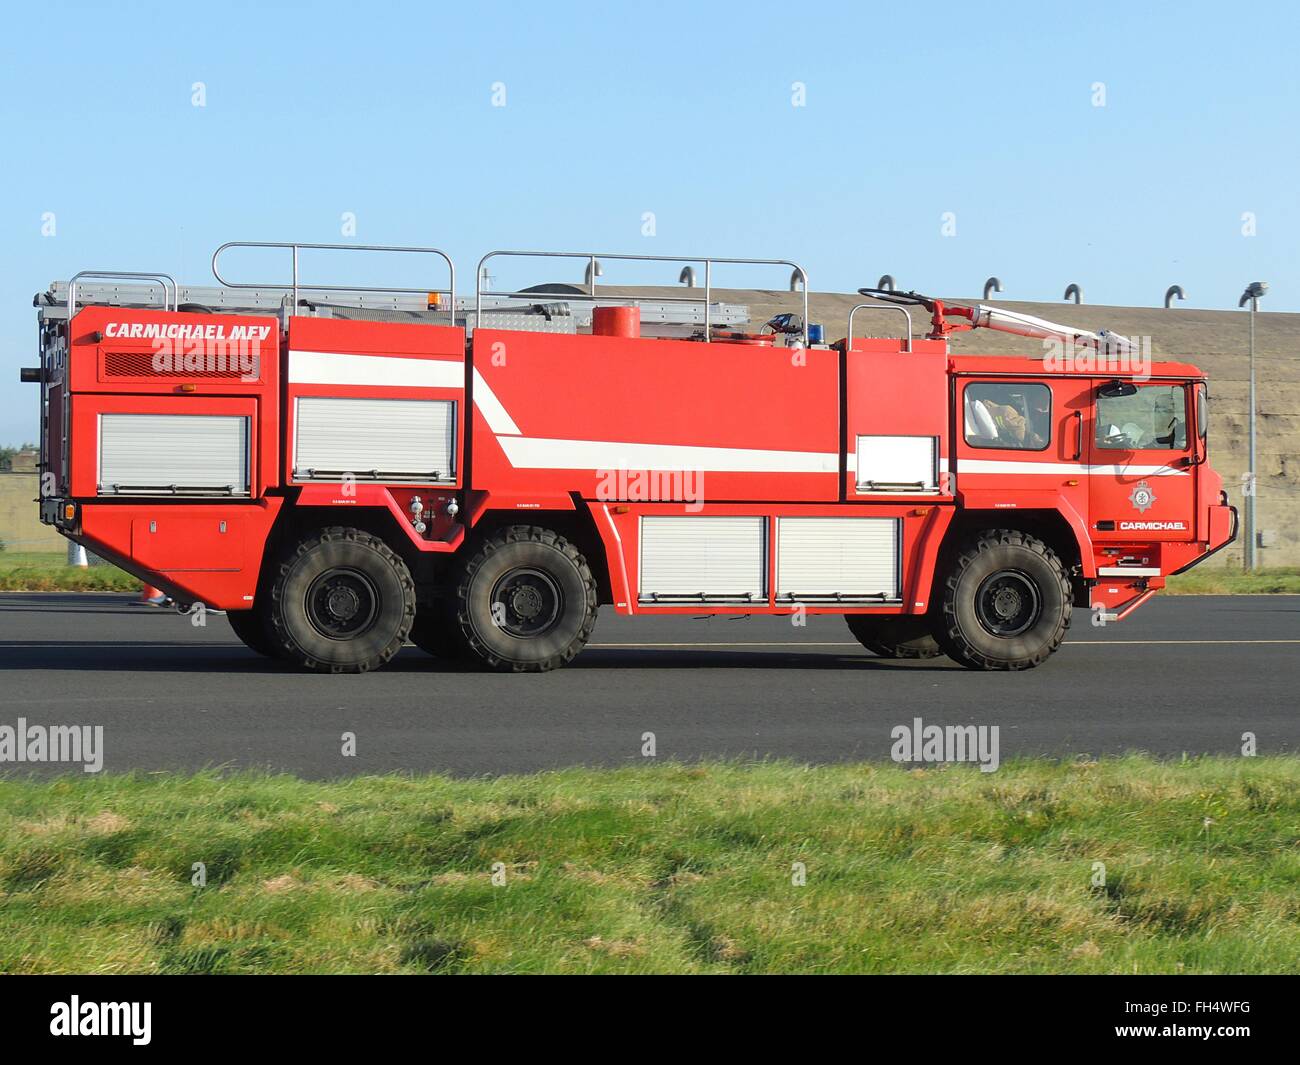 A Carmichael MFV fire tender of the Defence Fire and Rescue Service, at the RAF Leuchars Airshow in September 2012. Stock Photo